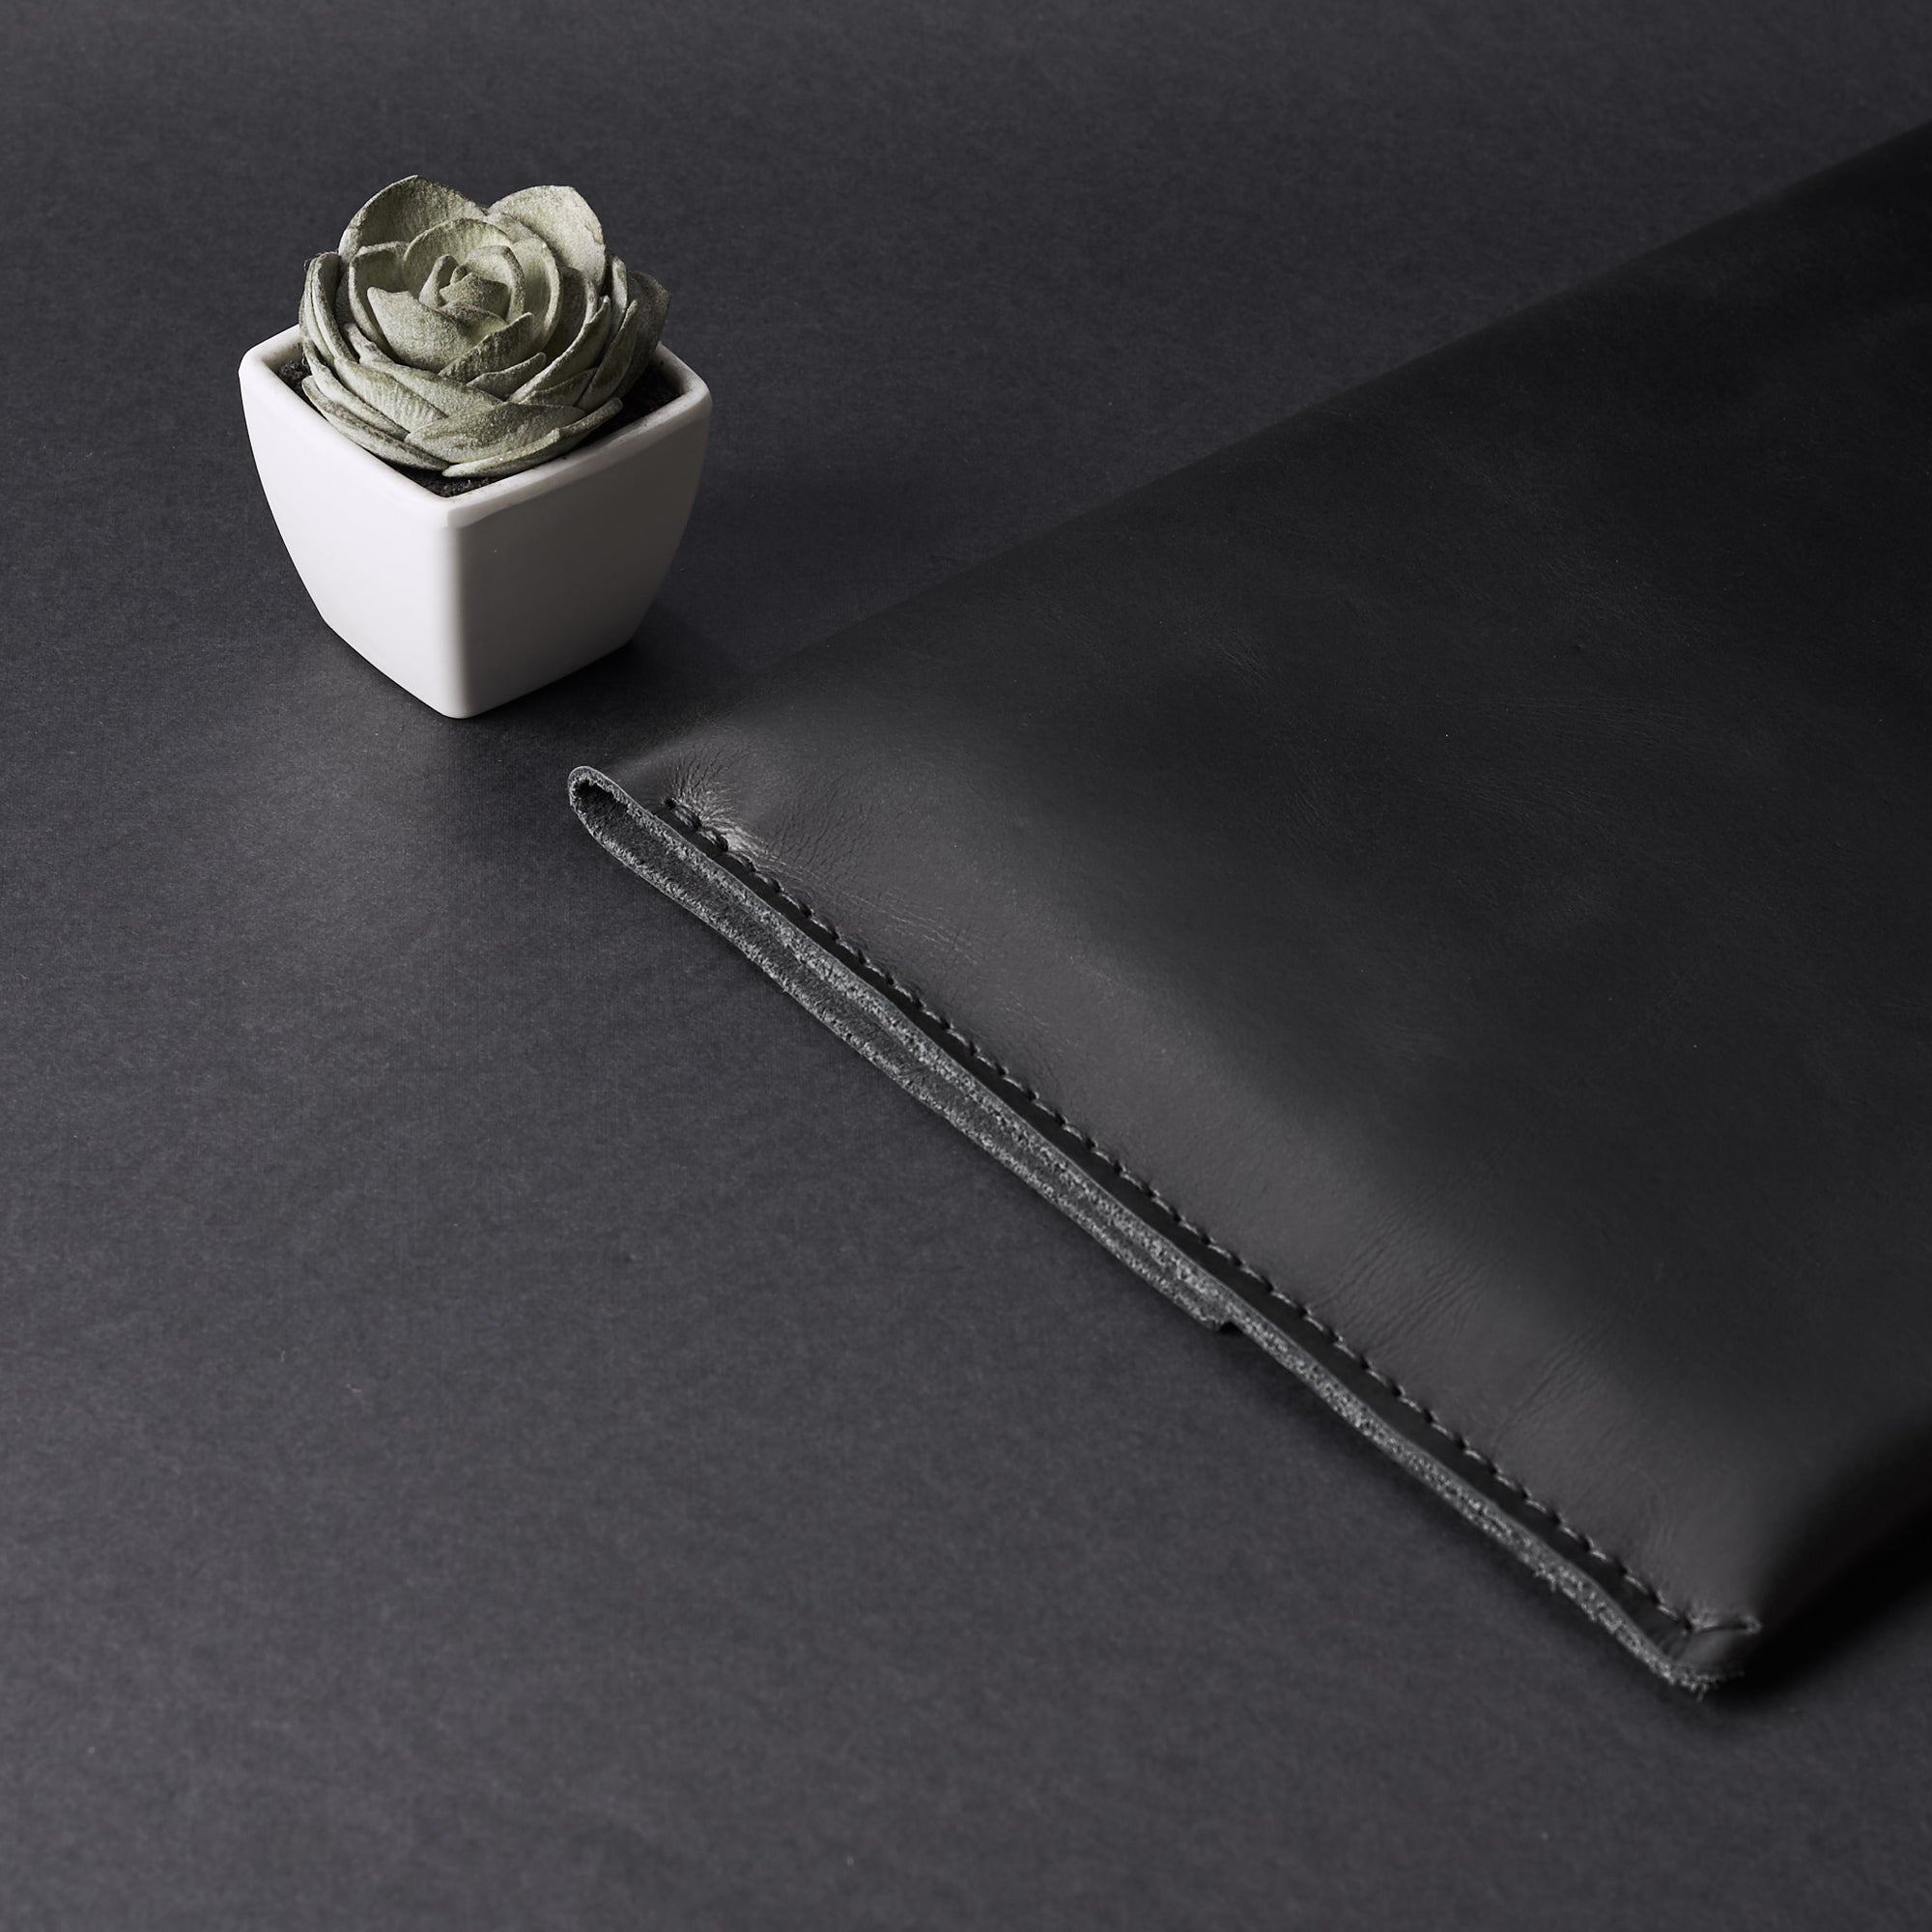 Hand stitched. Black Leather Walker iPad Cover Case Sleeve by Capra Leather